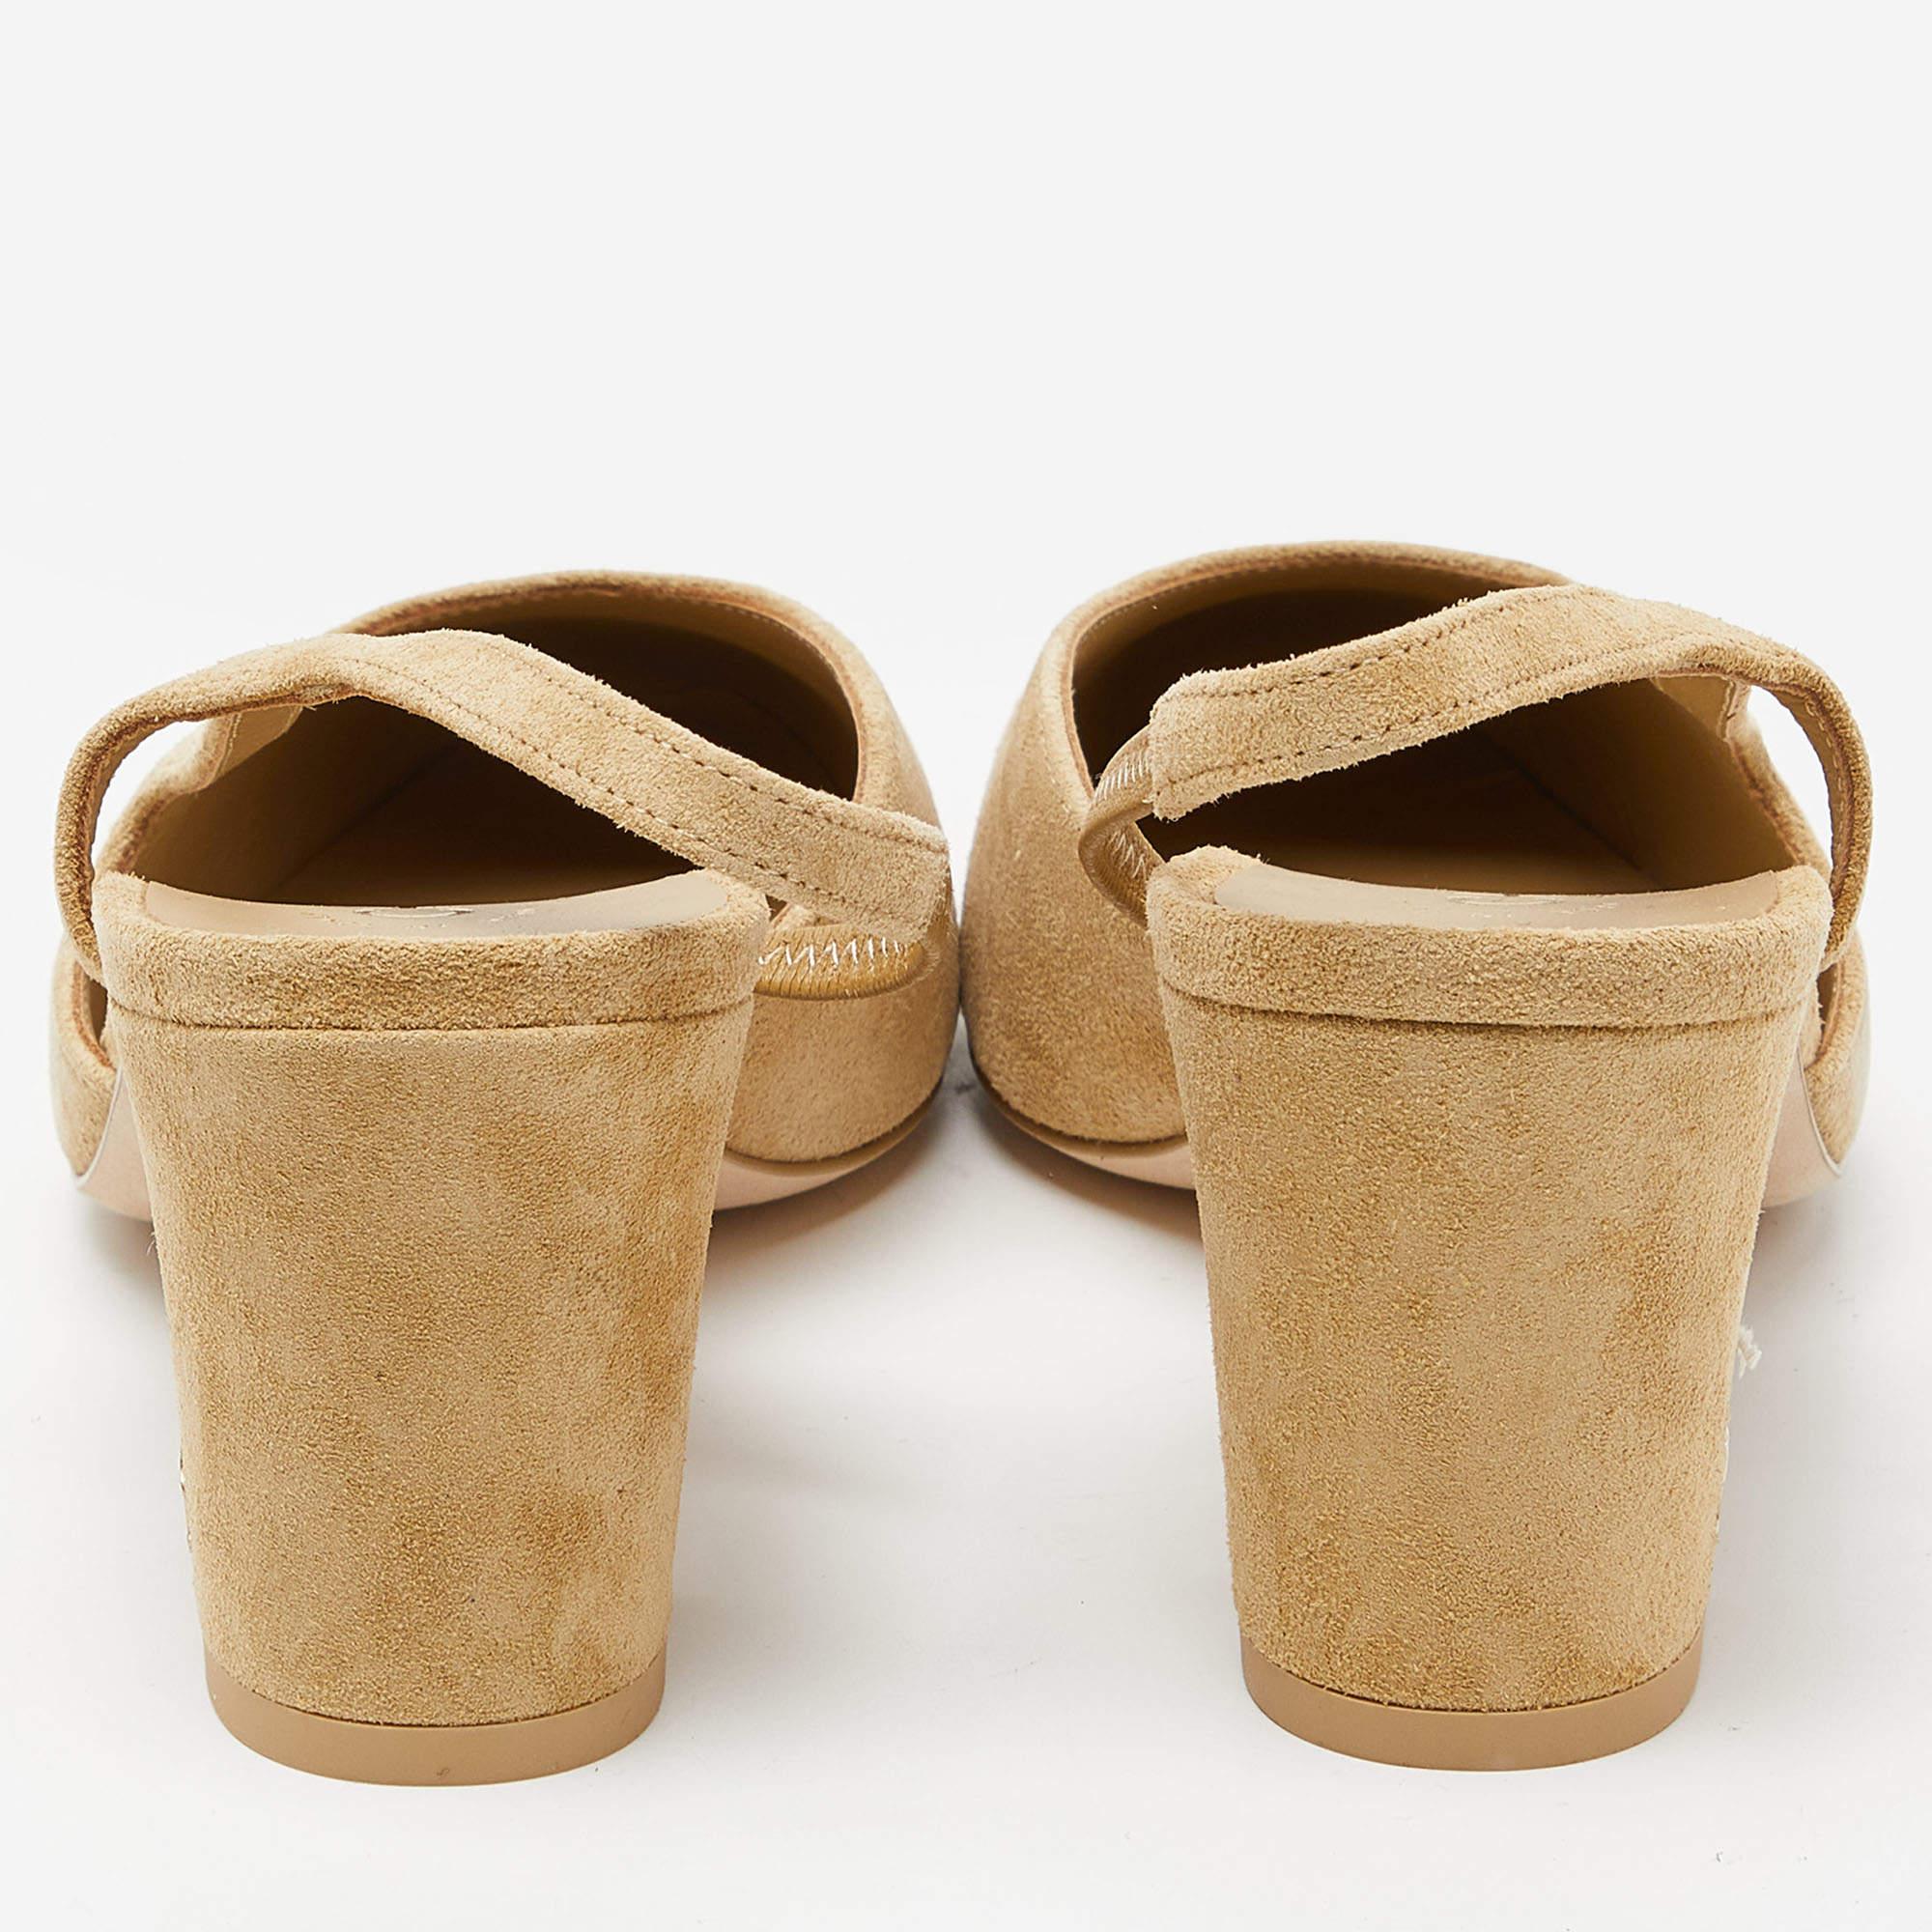 These sandals from the House of Chanel will add a chic touch to your attire. They are created using two tone beige exterior. They flaunt cap toes, a slingback, and block heels. Stay stylish all day with these Chanel sandals.

Includes: Original